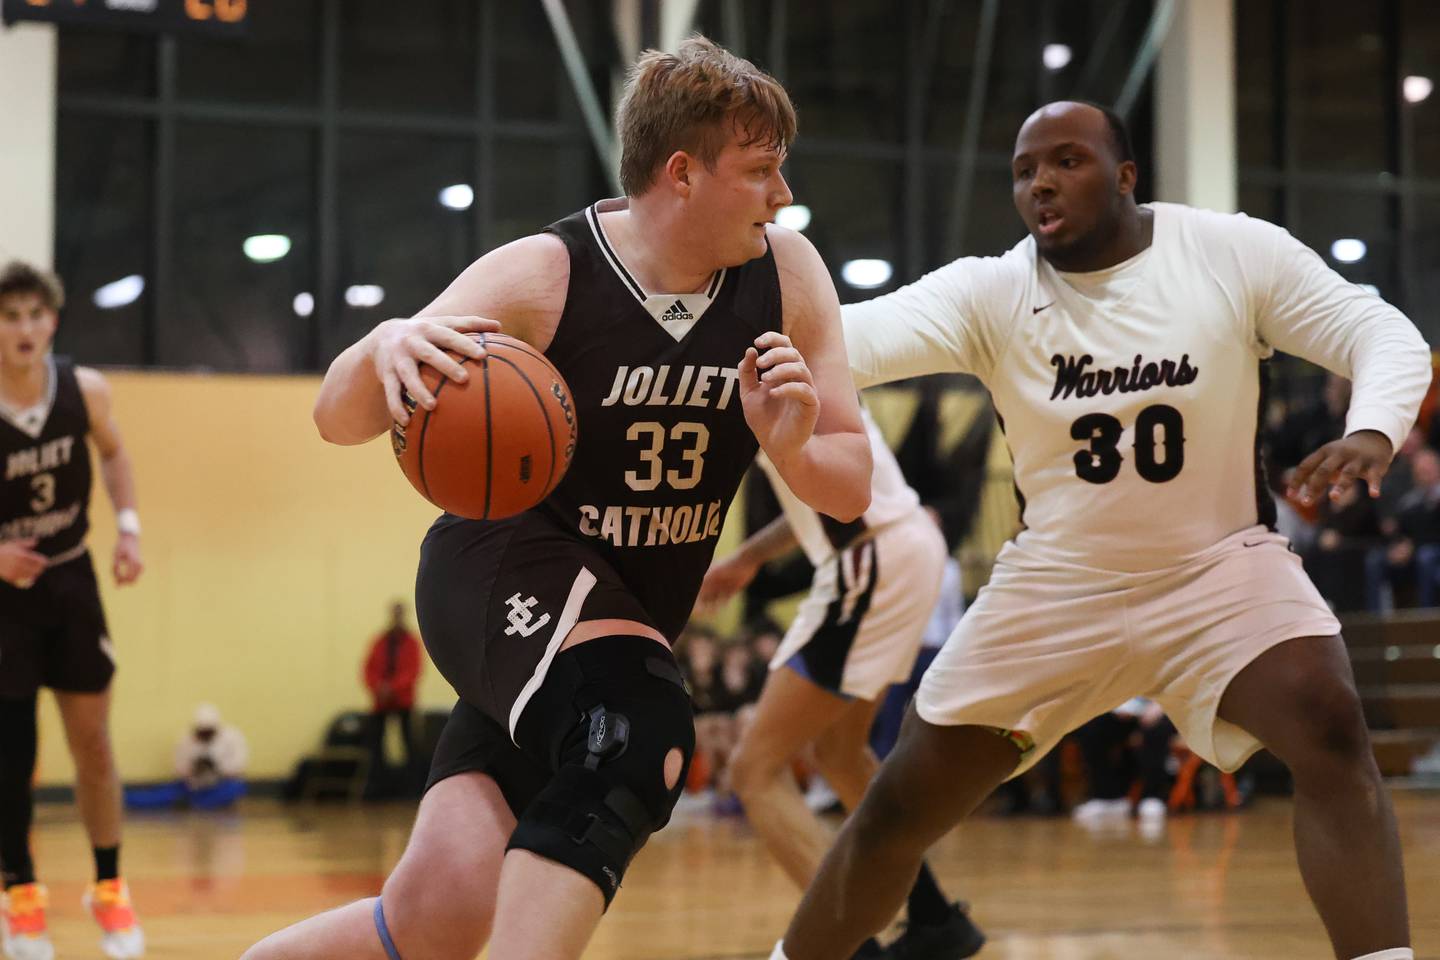 Joliet Catholic’s Anthony Birsa drives to the basket against Prespectives in the Class 2A Julian Sectional championship on Friday, March 3rd, 2023 in Chicago.